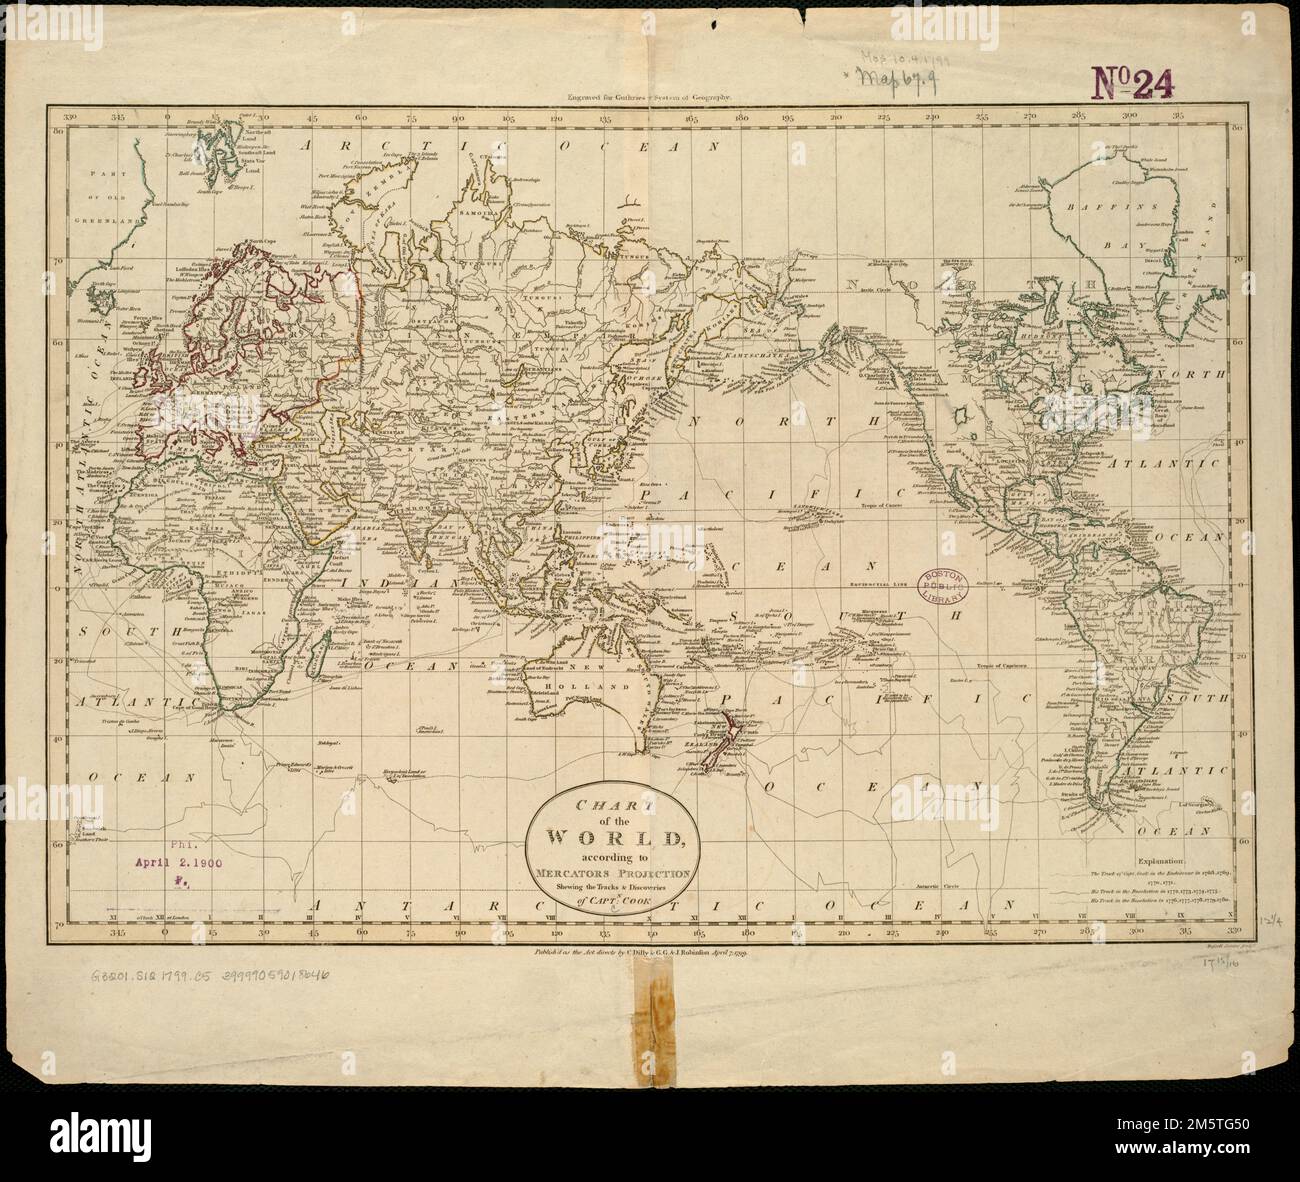 Chart of the world according to Mercators projection, shewing the ...